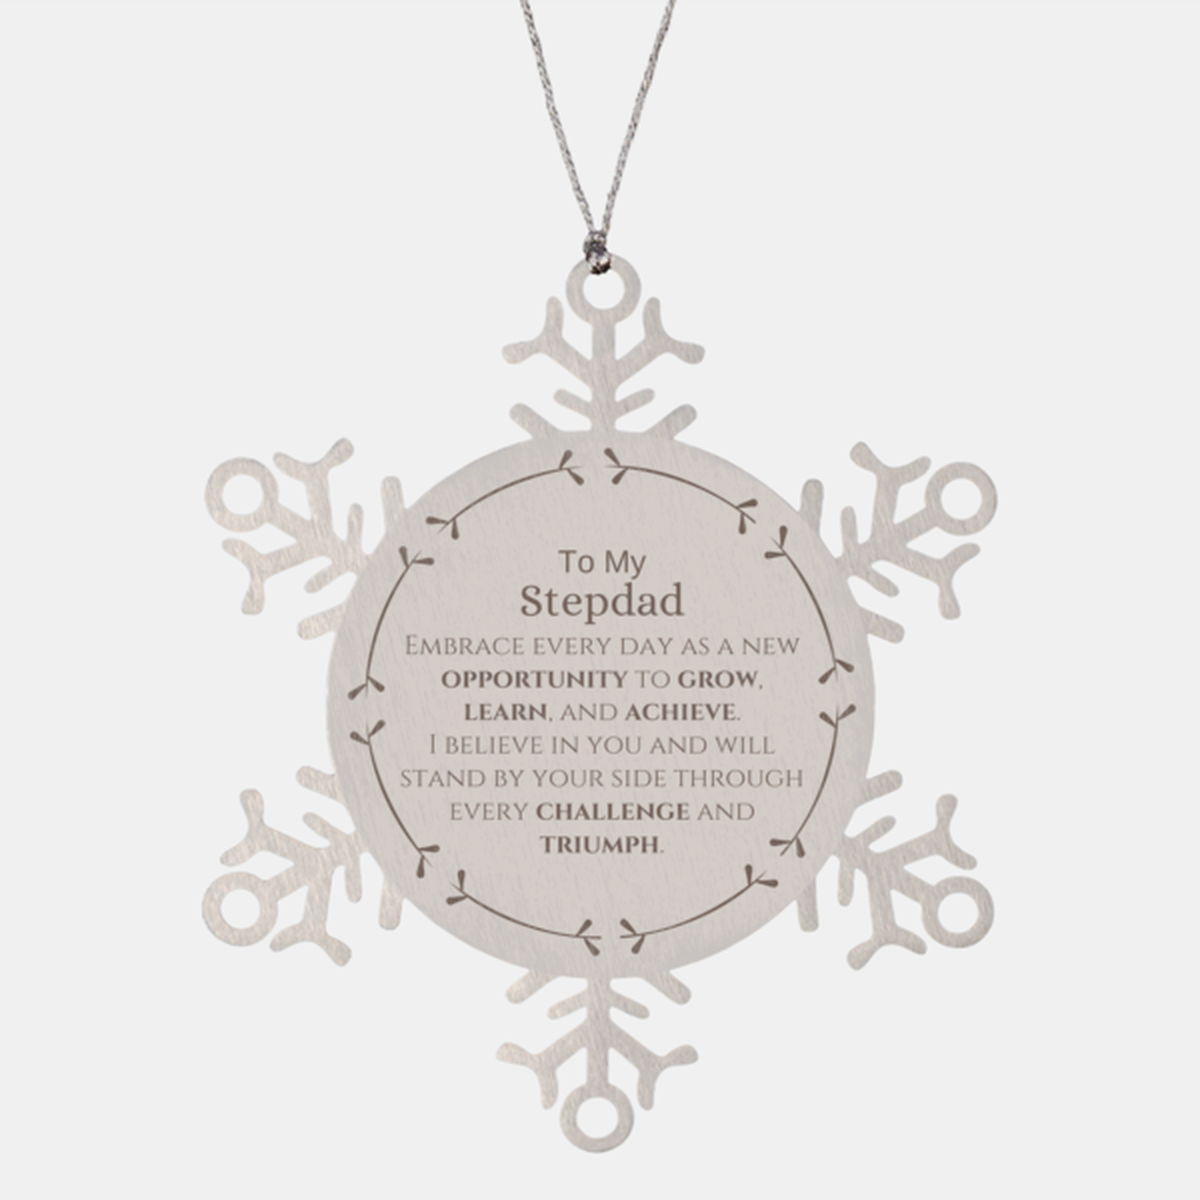 To My Stepdad Gifts, I believe in you and will stand by your side, Inspirational Snowflake Ornament For Stepdad, Birthday Christmas Motivational Stepdad Gifts